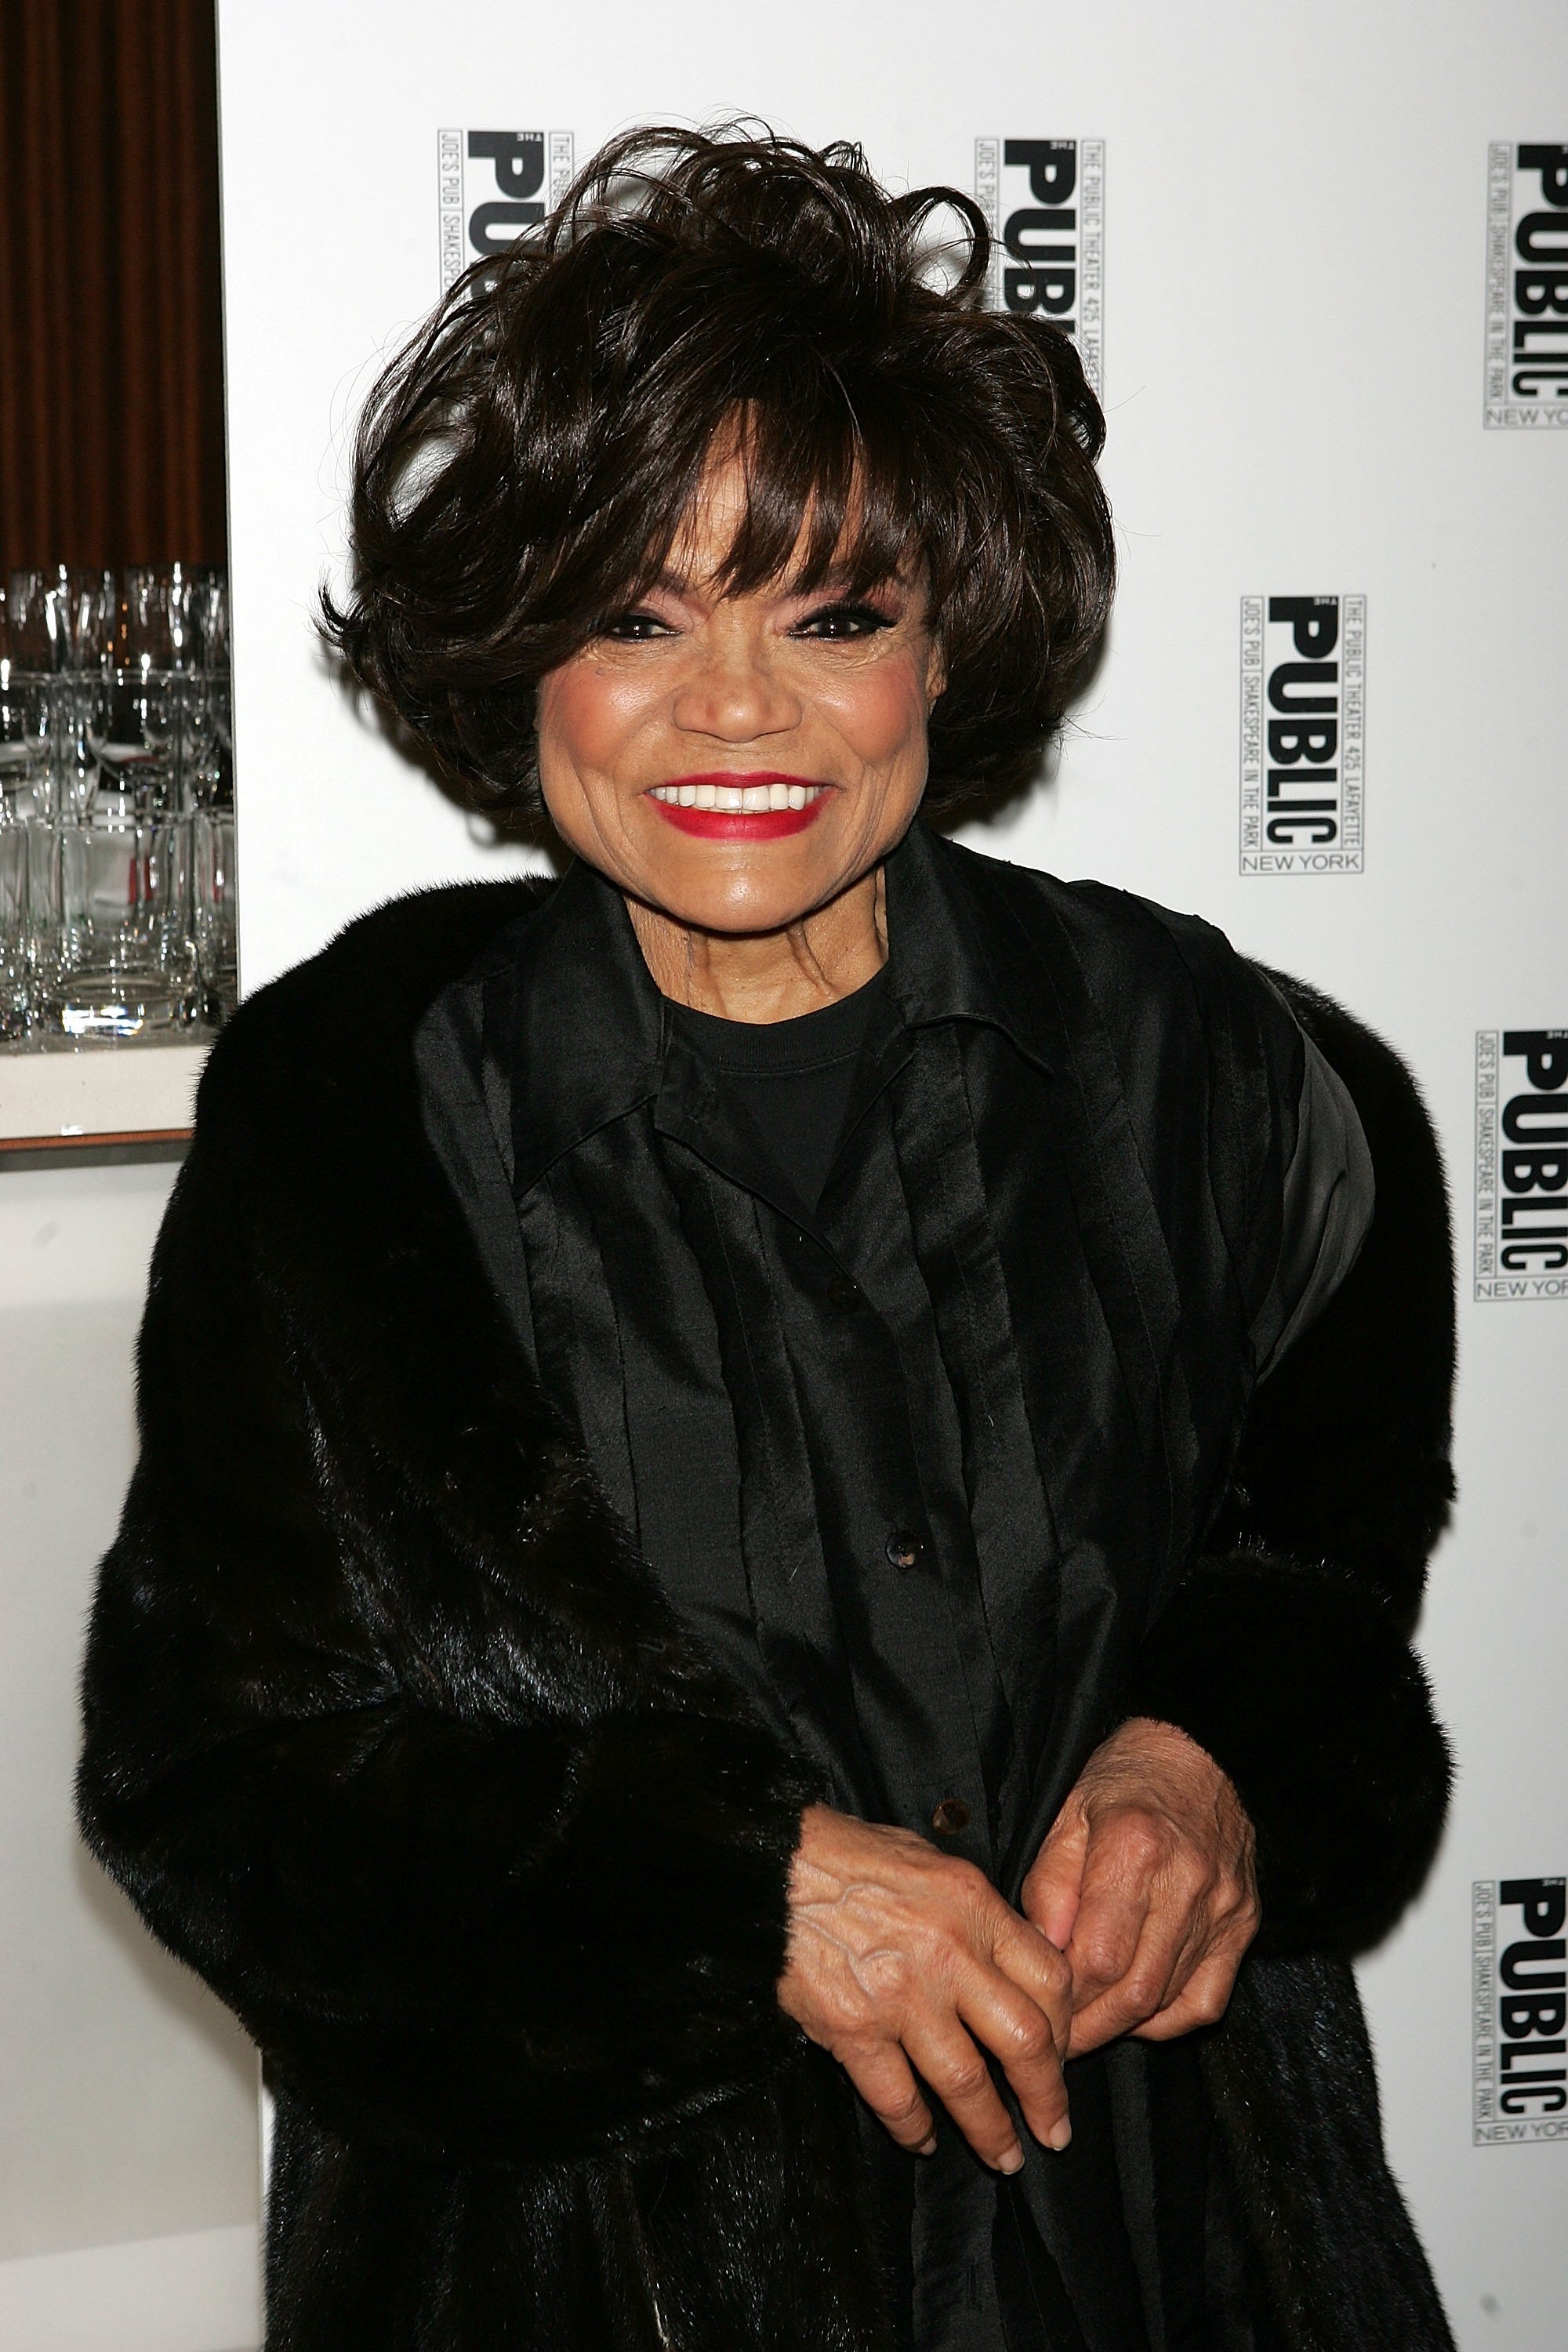 Eartha Kitt at the after-party for "The Public Sings: A 50th Anniversary Celebration" at the Time Warner Center January 30, 2006, in New York City. | Photo: Getty Images